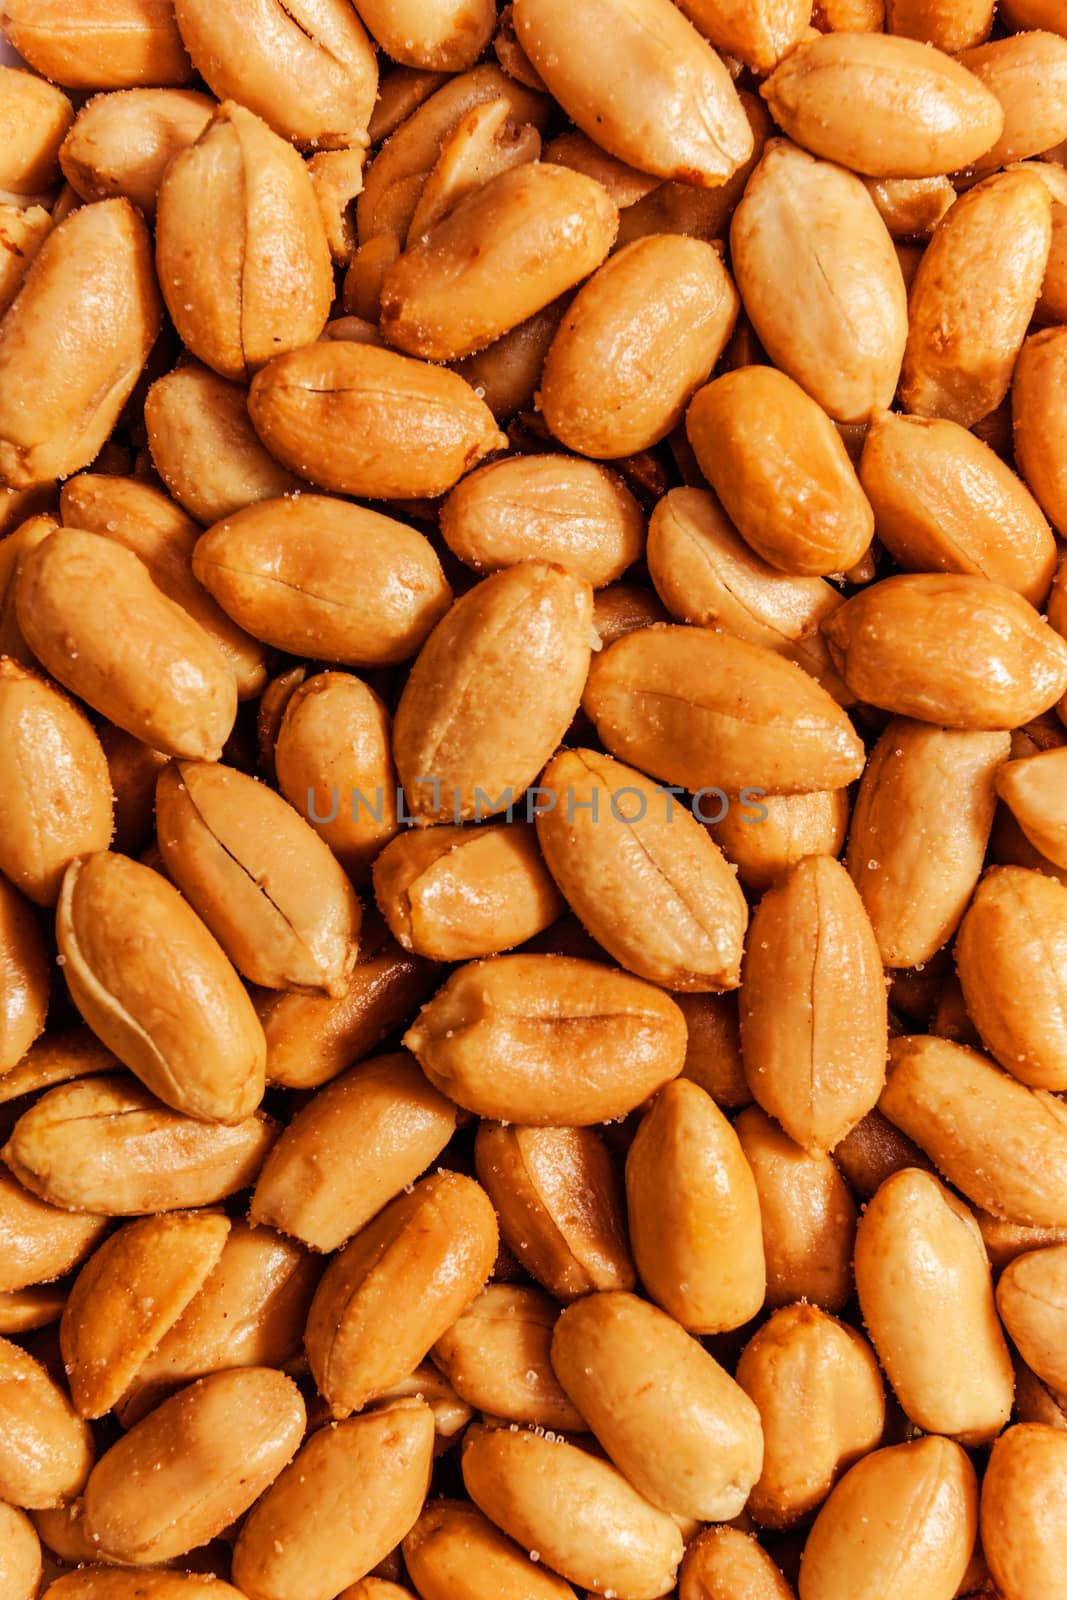 Roasted peanuts in closeup on the white background